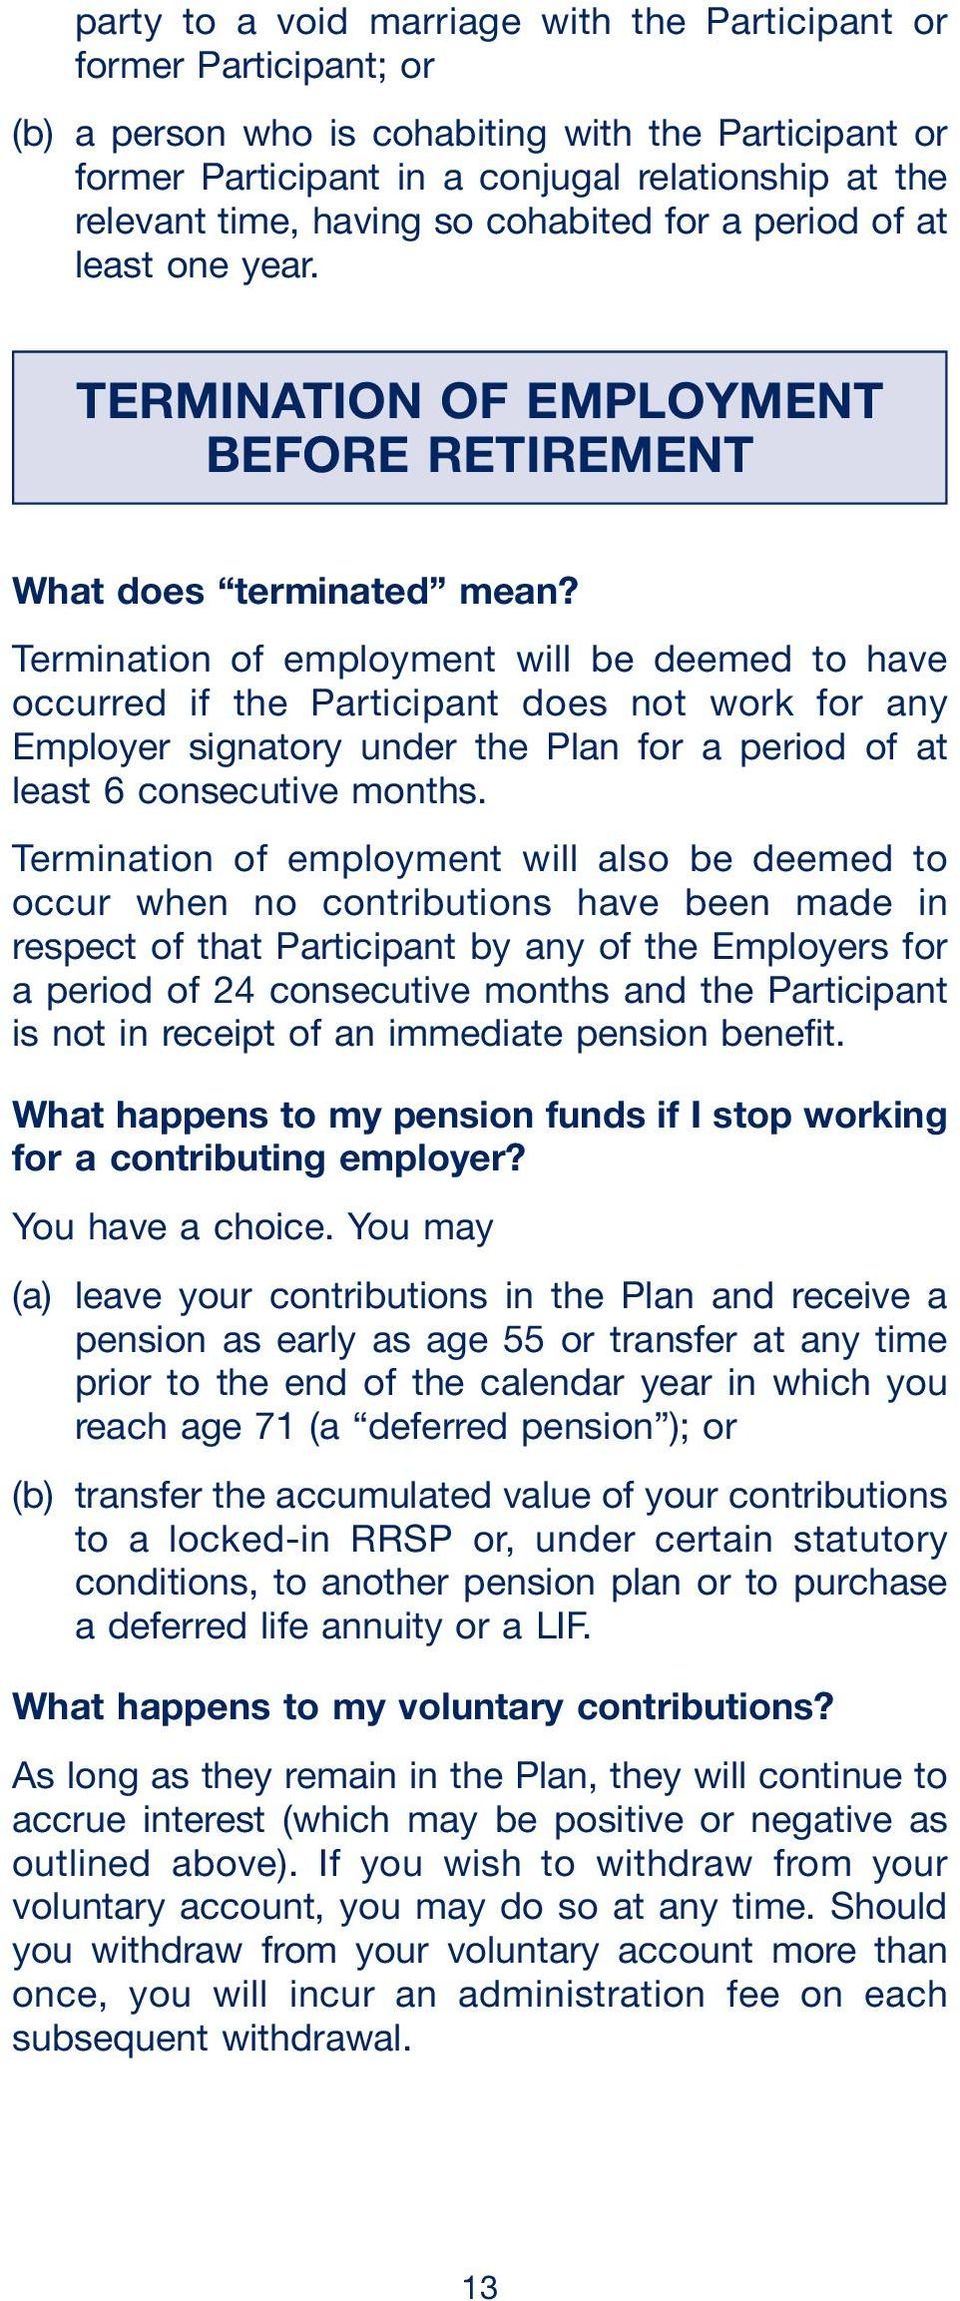 Termination of employment will be deemed to have occurred if the Participant does not work for any Employer signatory under the Plan for a period of at least 6 consecutive months.